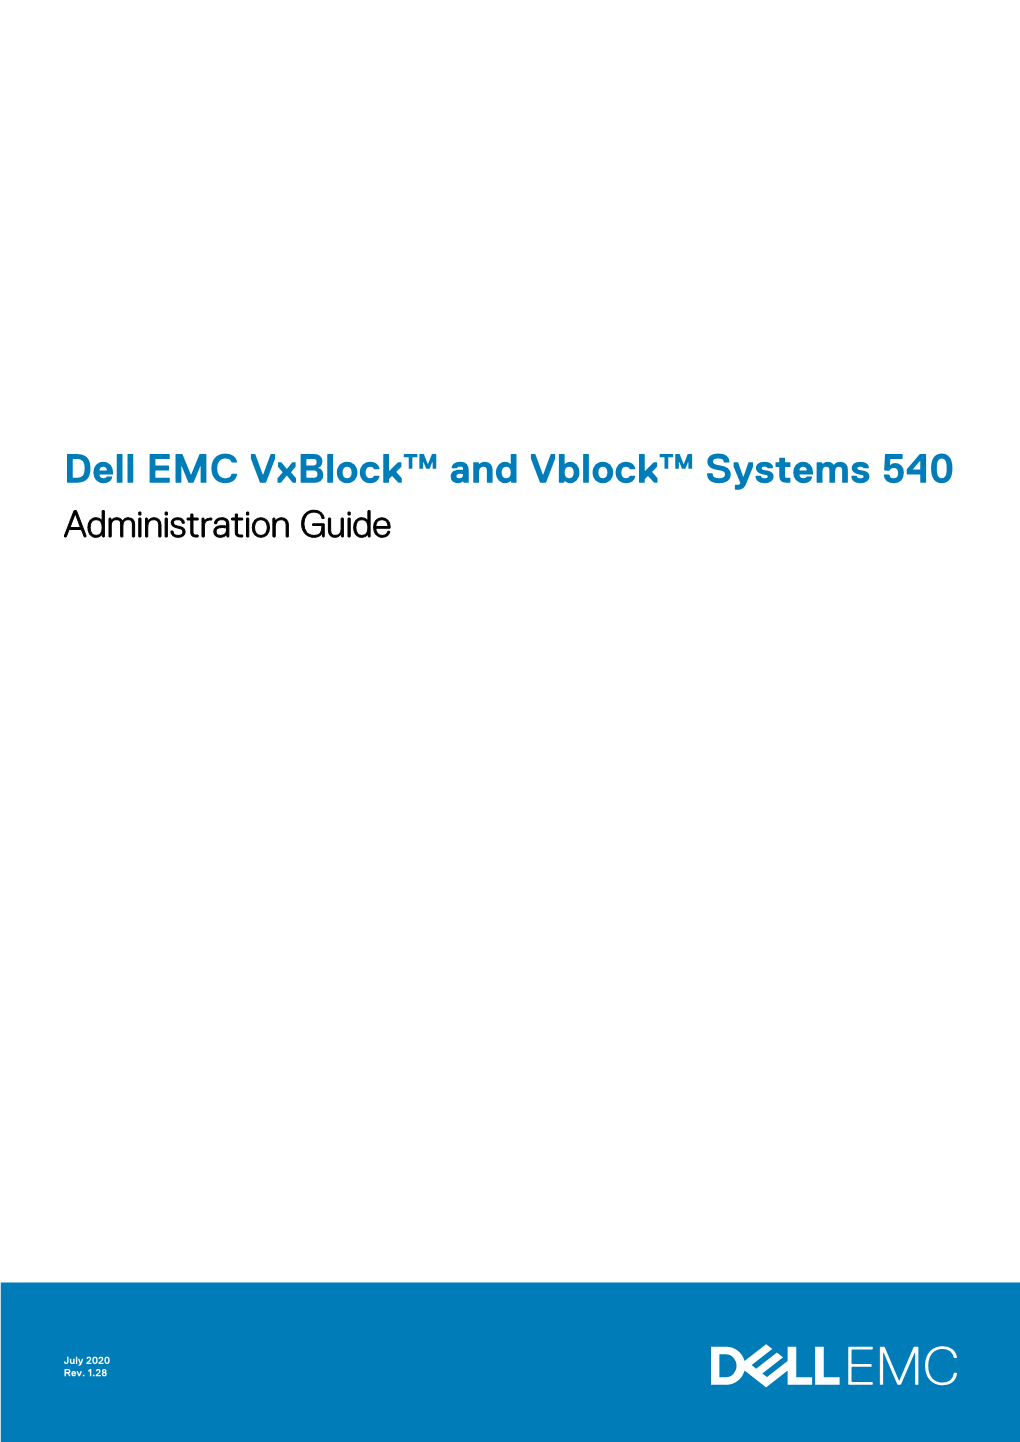 Dell EMC Vxblock™ and Vblock™ Systems 540 Administration Guide